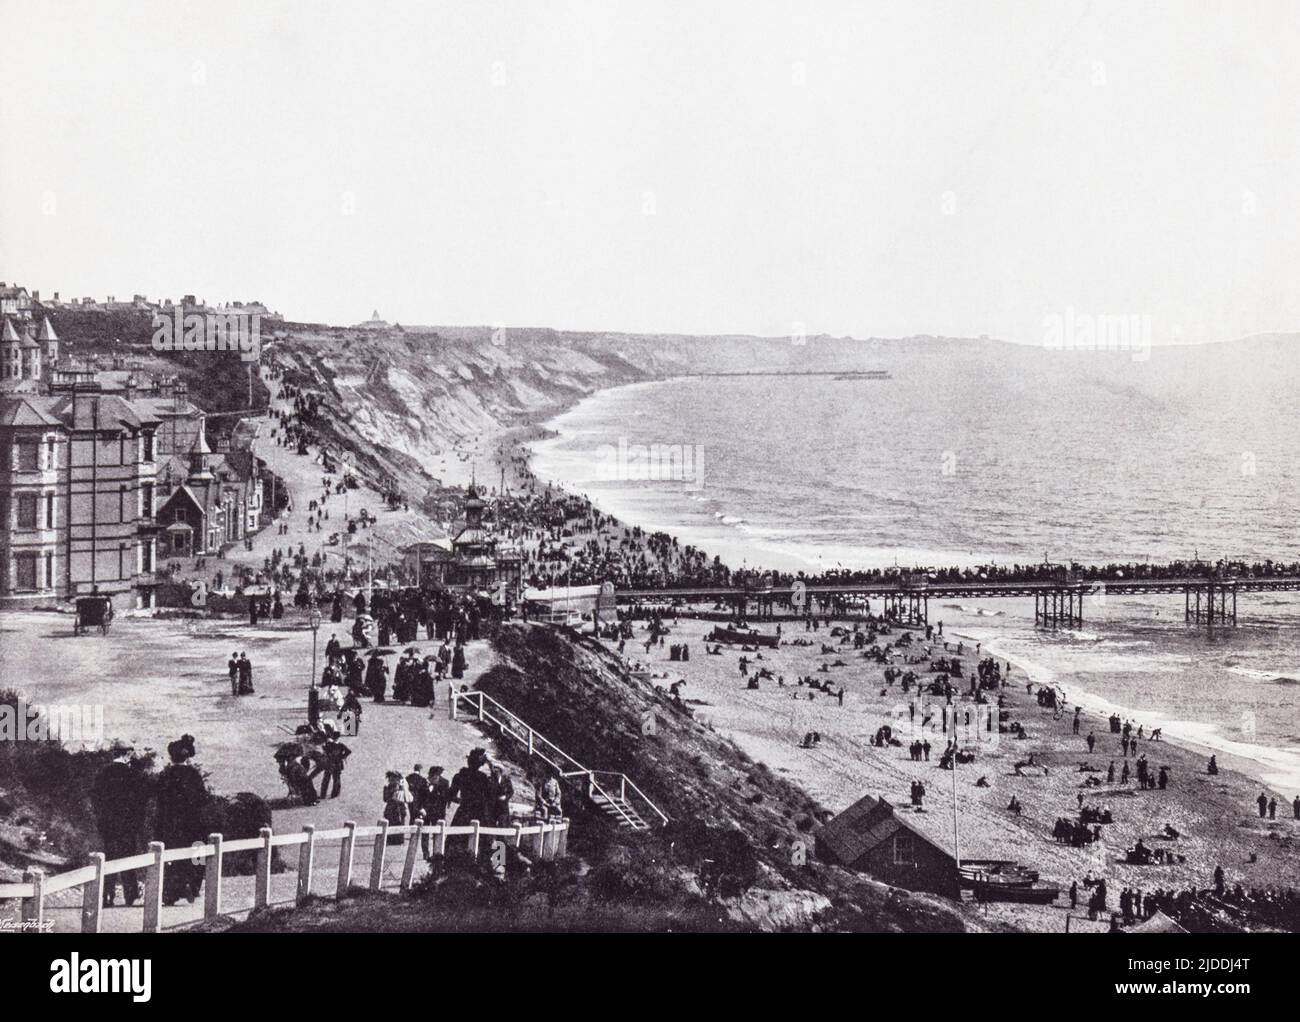 Bournemouth, Dorset, England, seen here from the West Cliff in the 19th century.  From Around The Coast,  An Album of Pictures from Photographs of the Chief Seaside Places of Interest in Great Britain and Ireland published London, 1895, by George Newnes Limited. Stock Photo